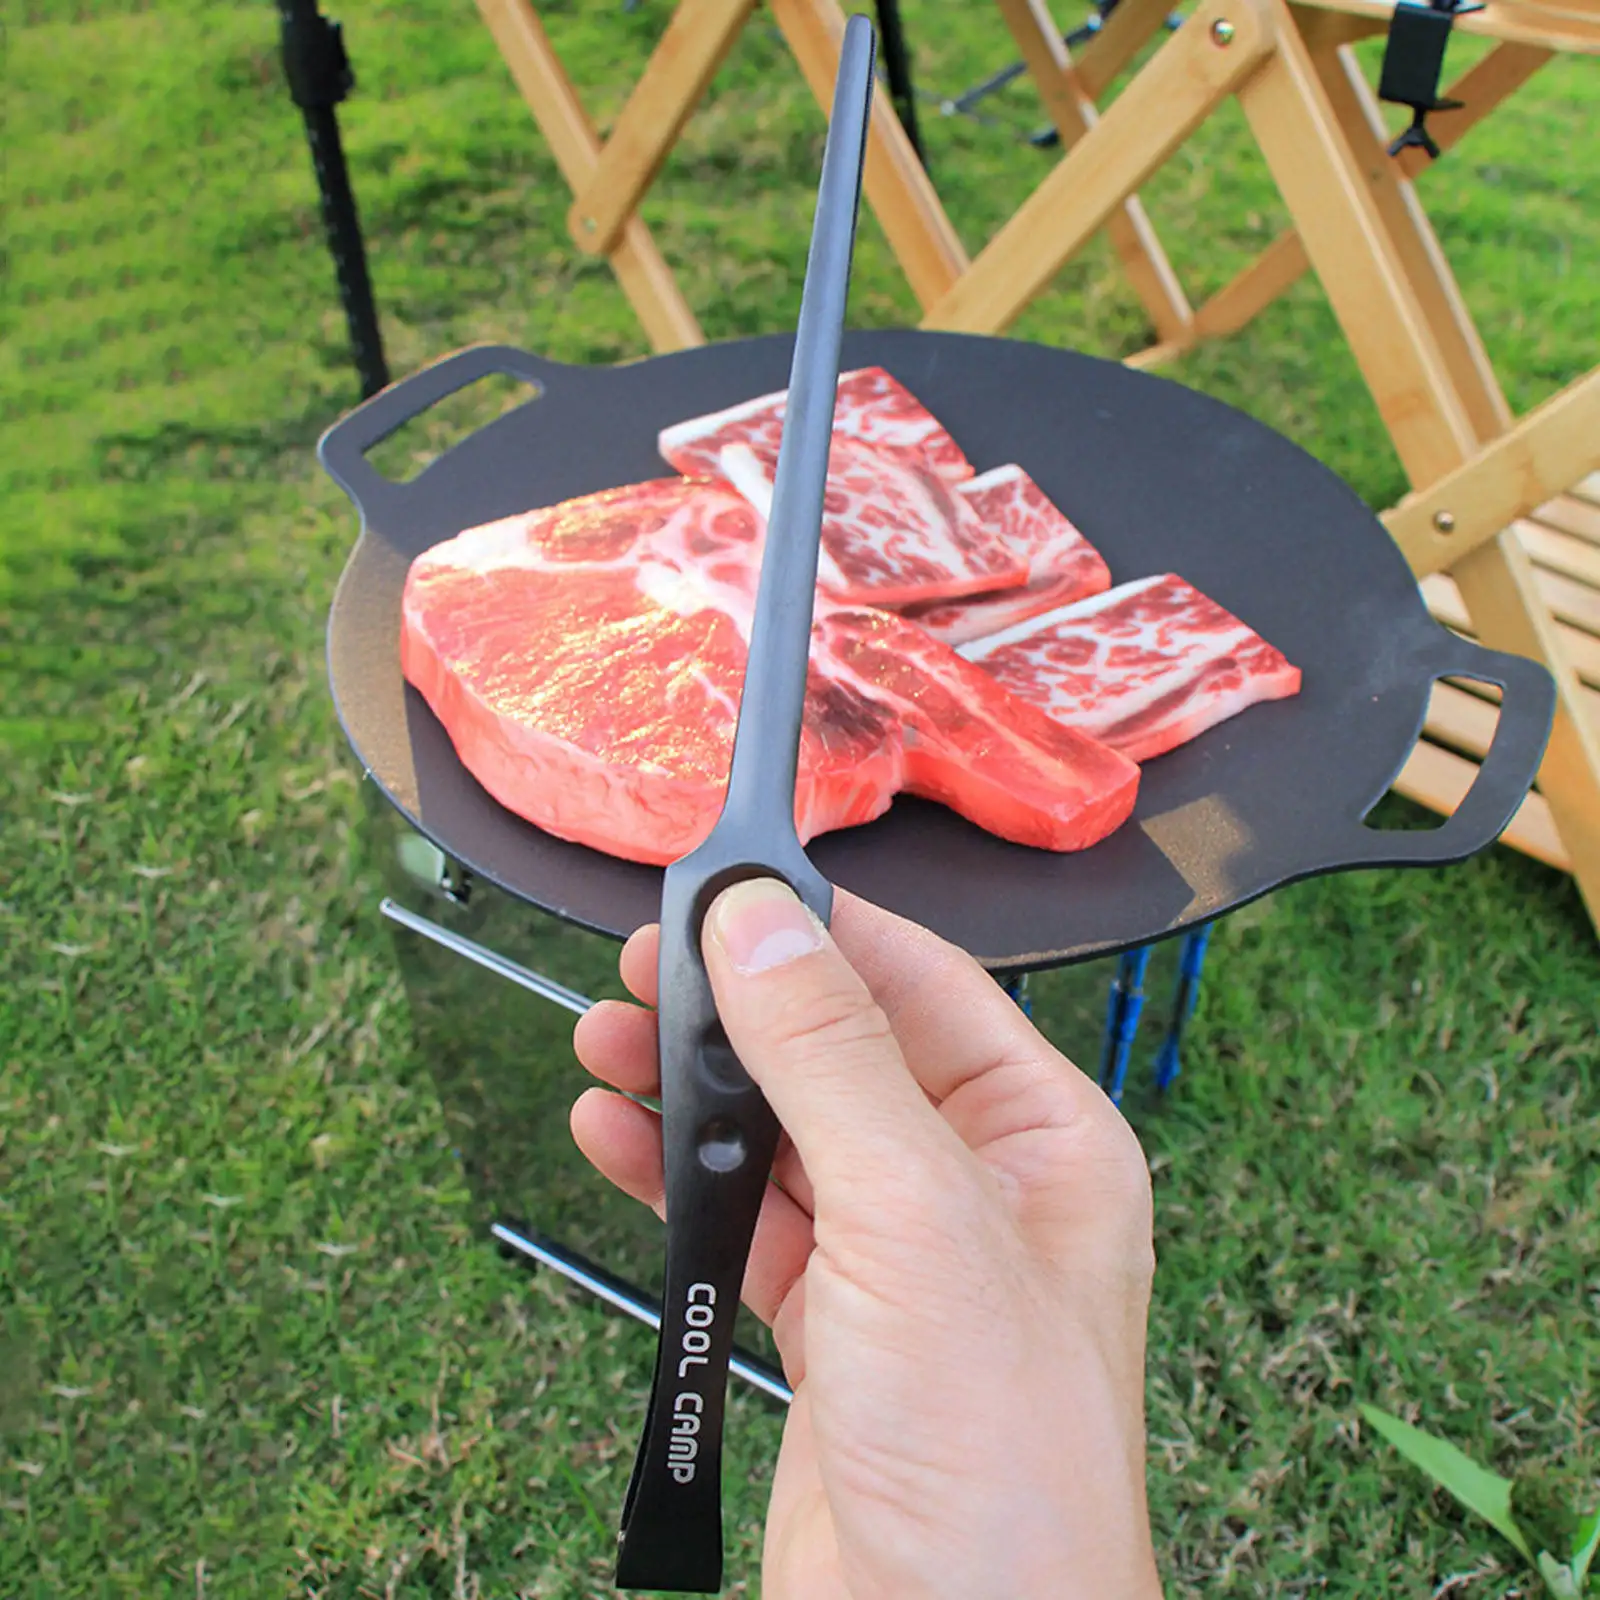 Grill Tongs Clip Tweezer Barbecue Lightweight Clamp Multi-Purpose Tool Long Cooking Utensil for Food Cake Bacon Kitchen Baking